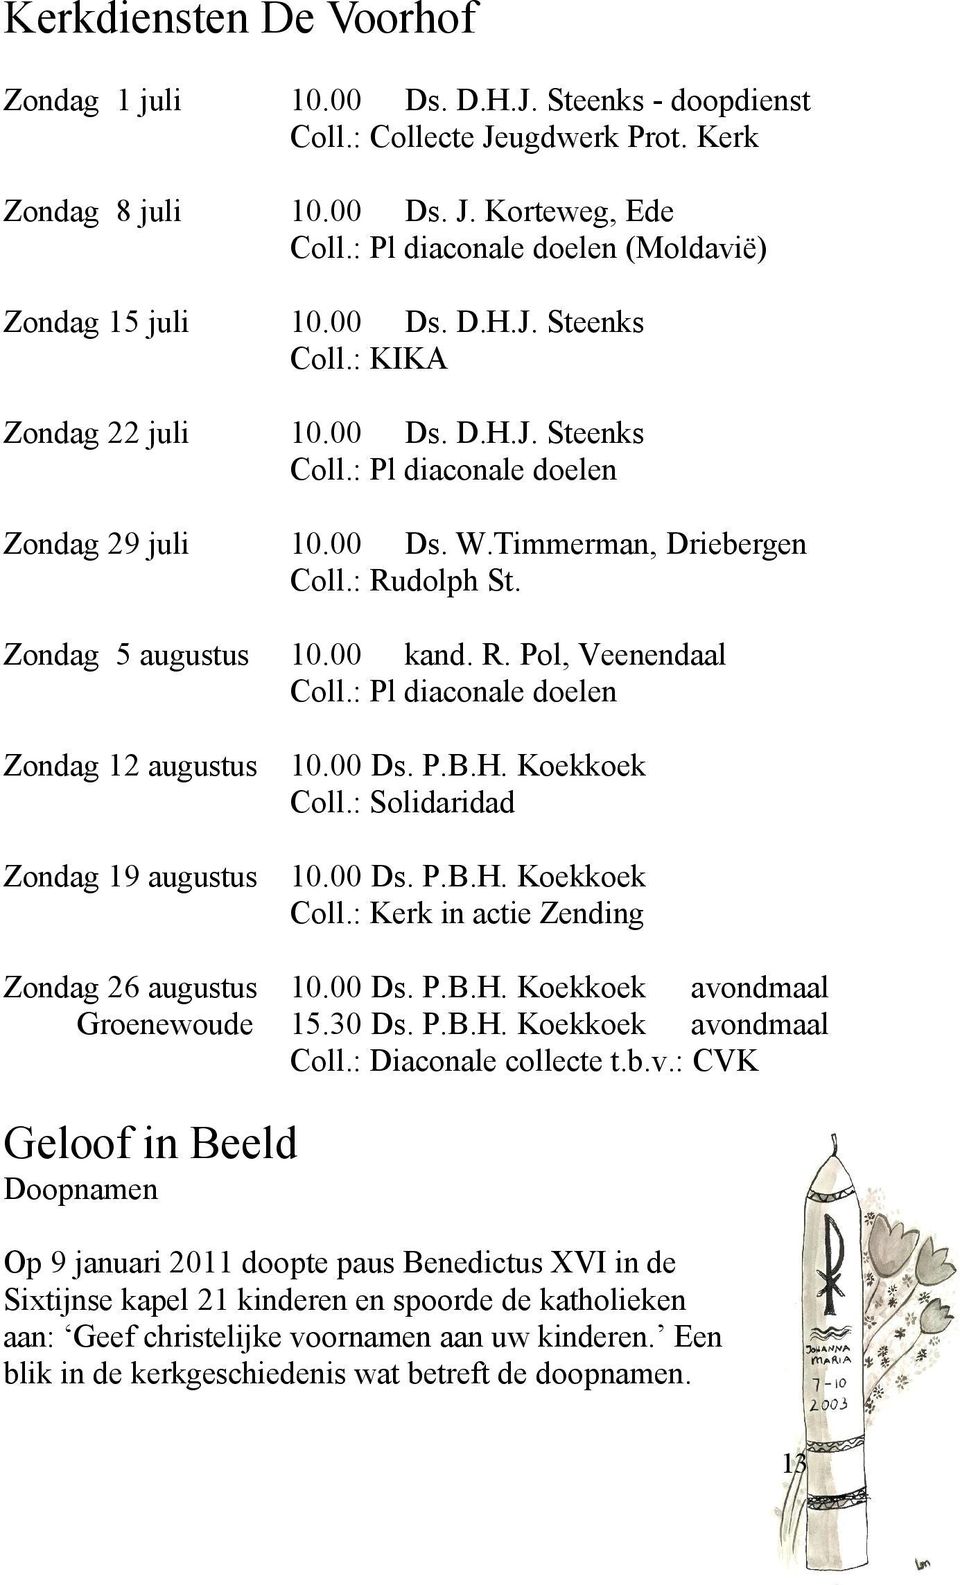 Timmerman, Driebergen Coll.: Rudolph St. Zondag 5 augustus 10.00 kand. R. Pol, Veenendaal Coll.: Pl diaconale doelen Zondag 12 augustus Zondag 19 augustus 10.00 Ds. P.B.H. Koekkoek Coll.